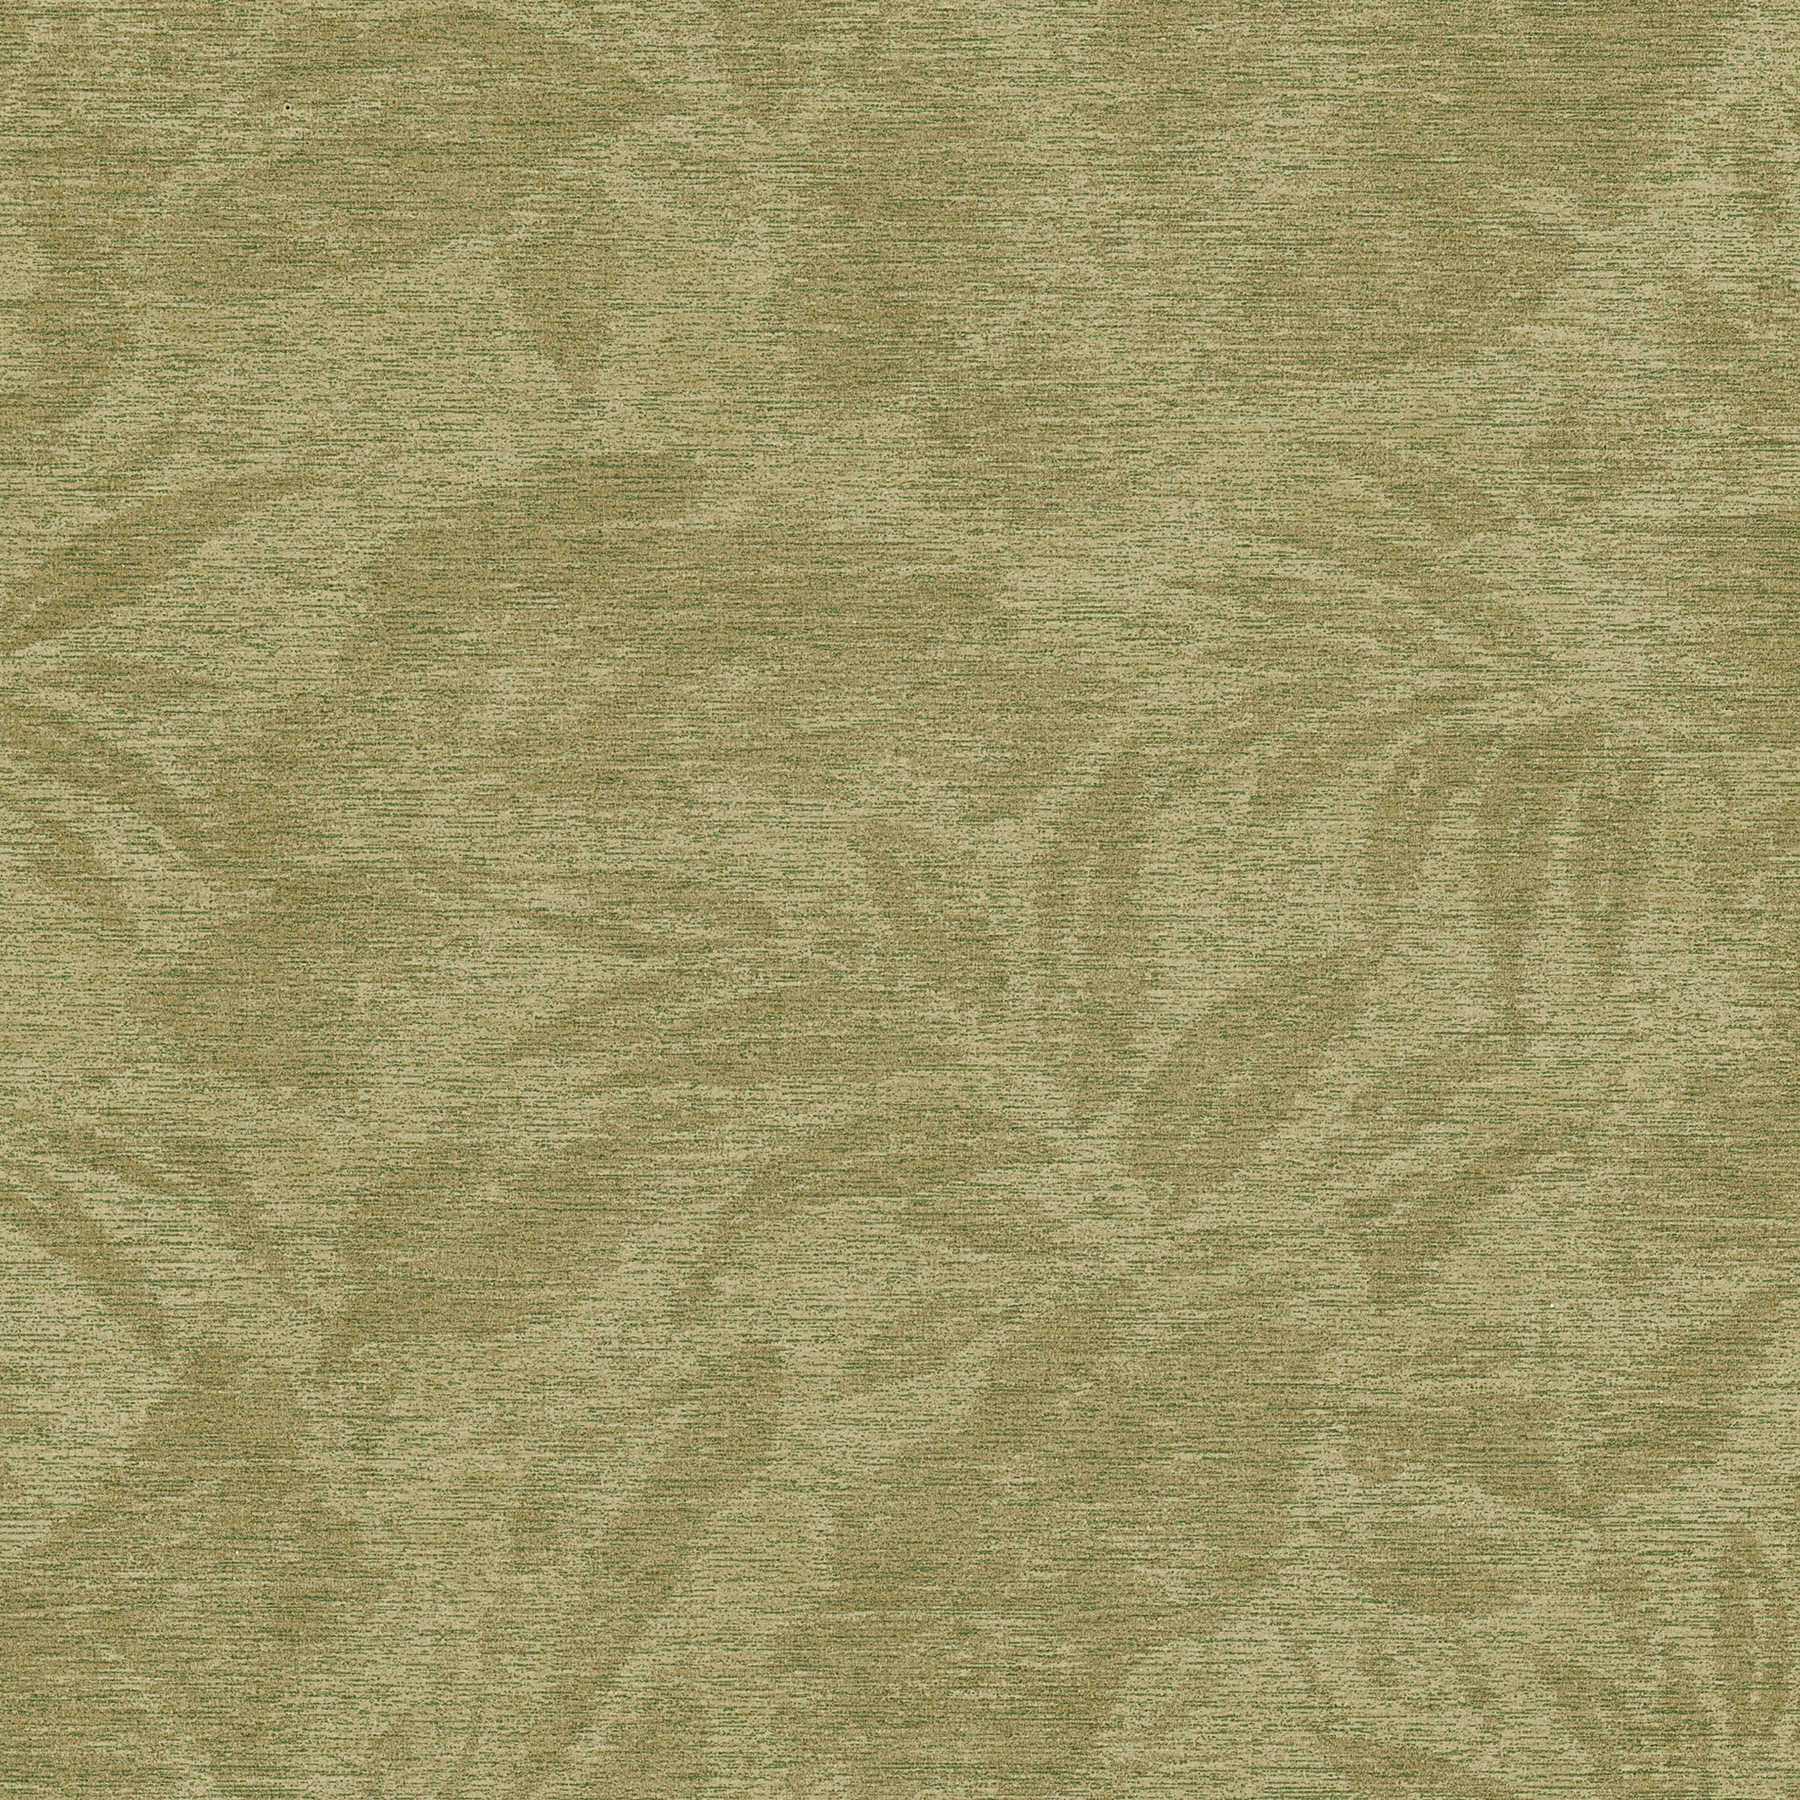 Mottled non-woven wallpaper with leaf pattern - green
